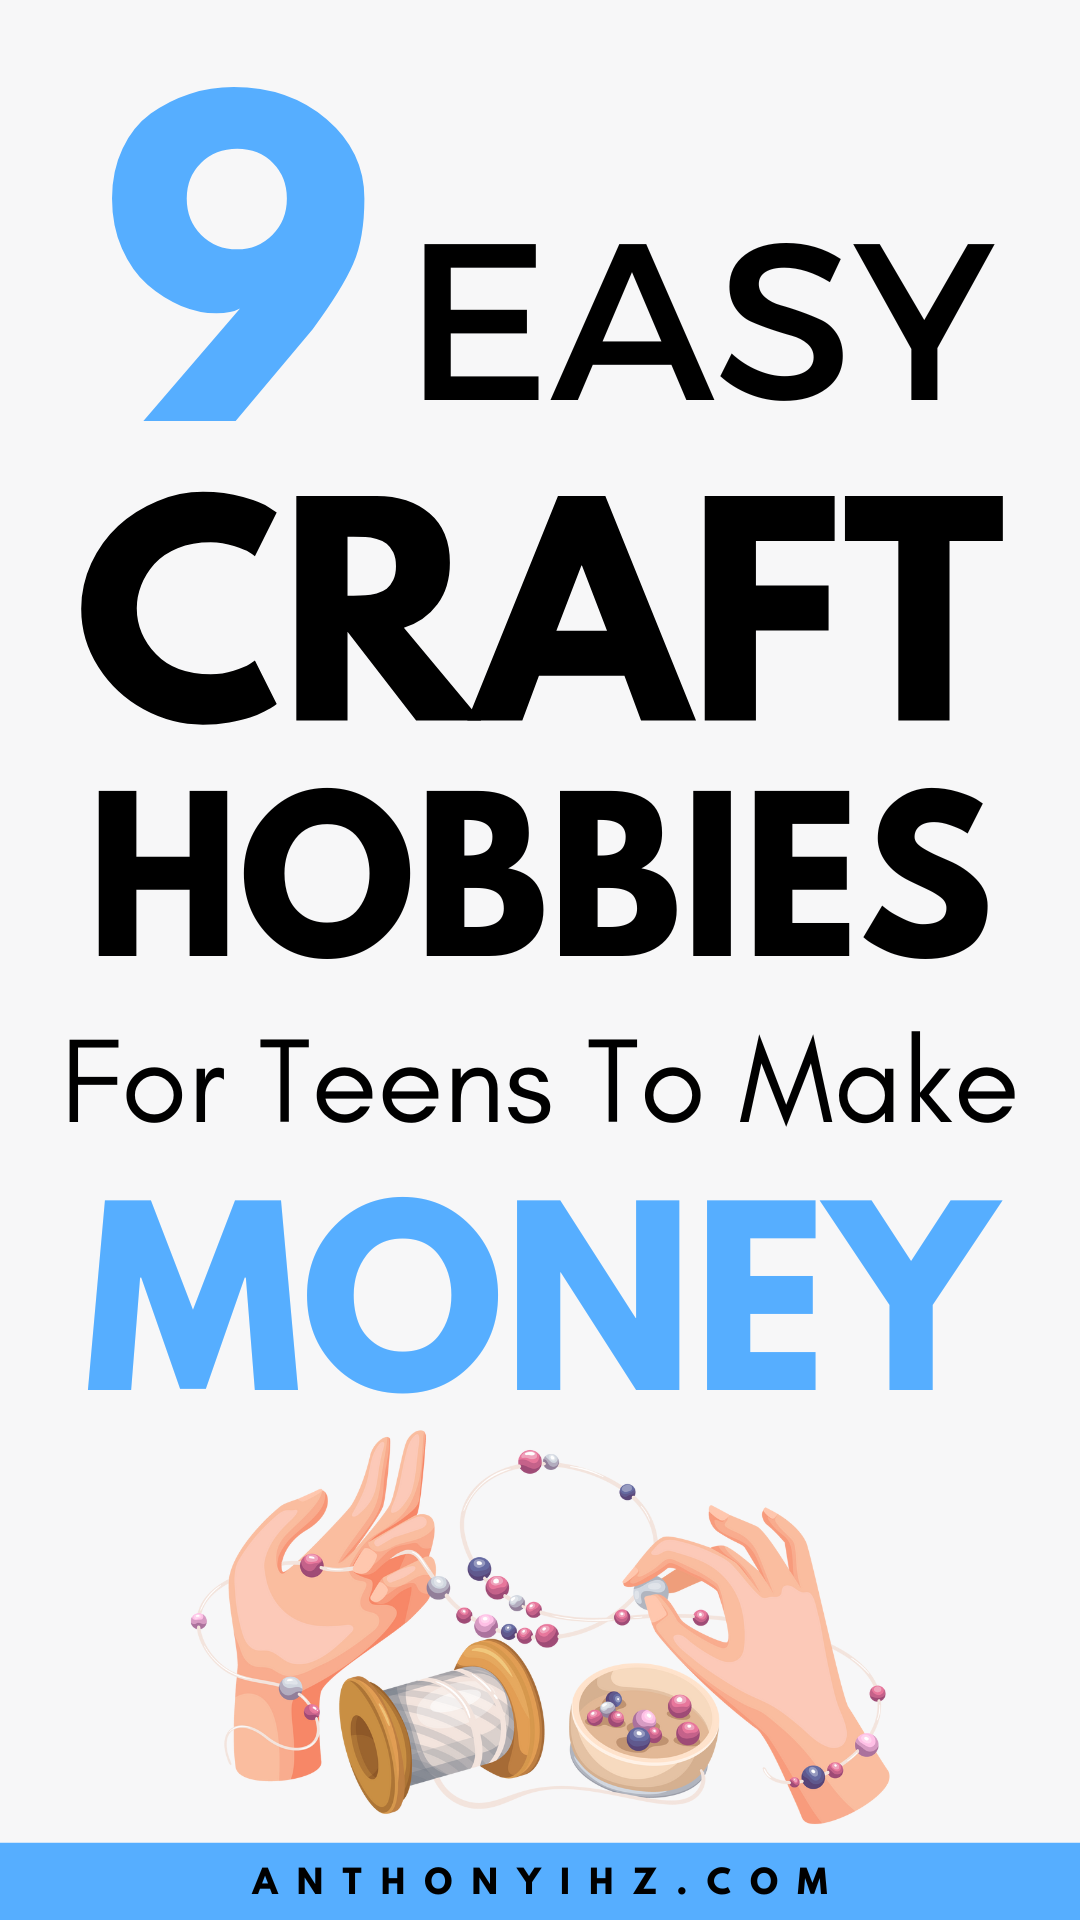 how to start making money from your hobby as a teen